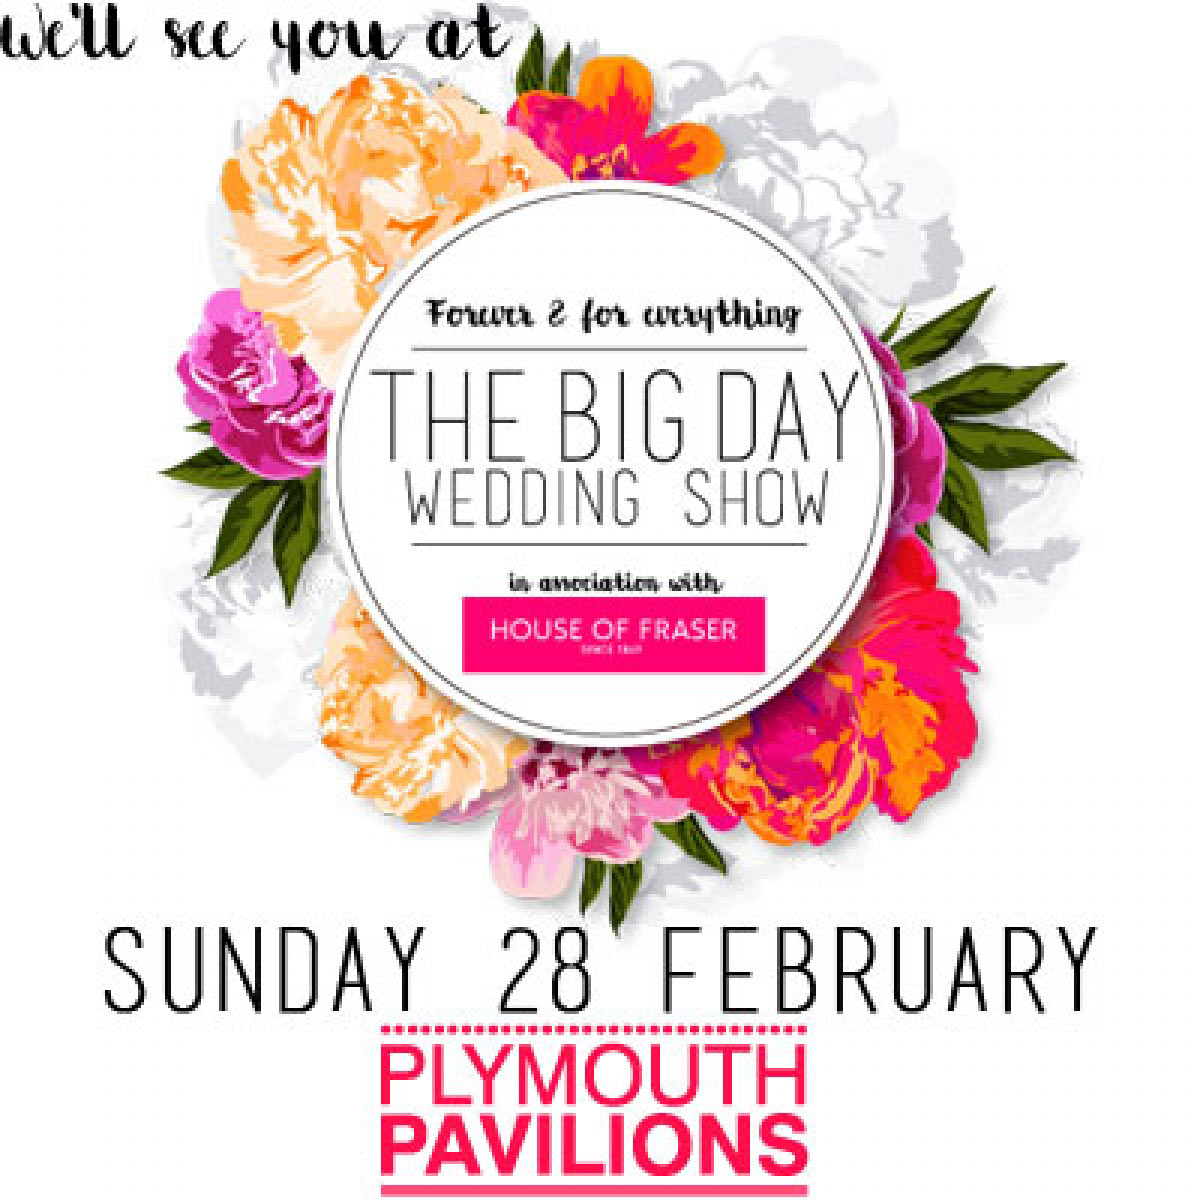 The Big Day Wedding Show at Plymouth Pavilions